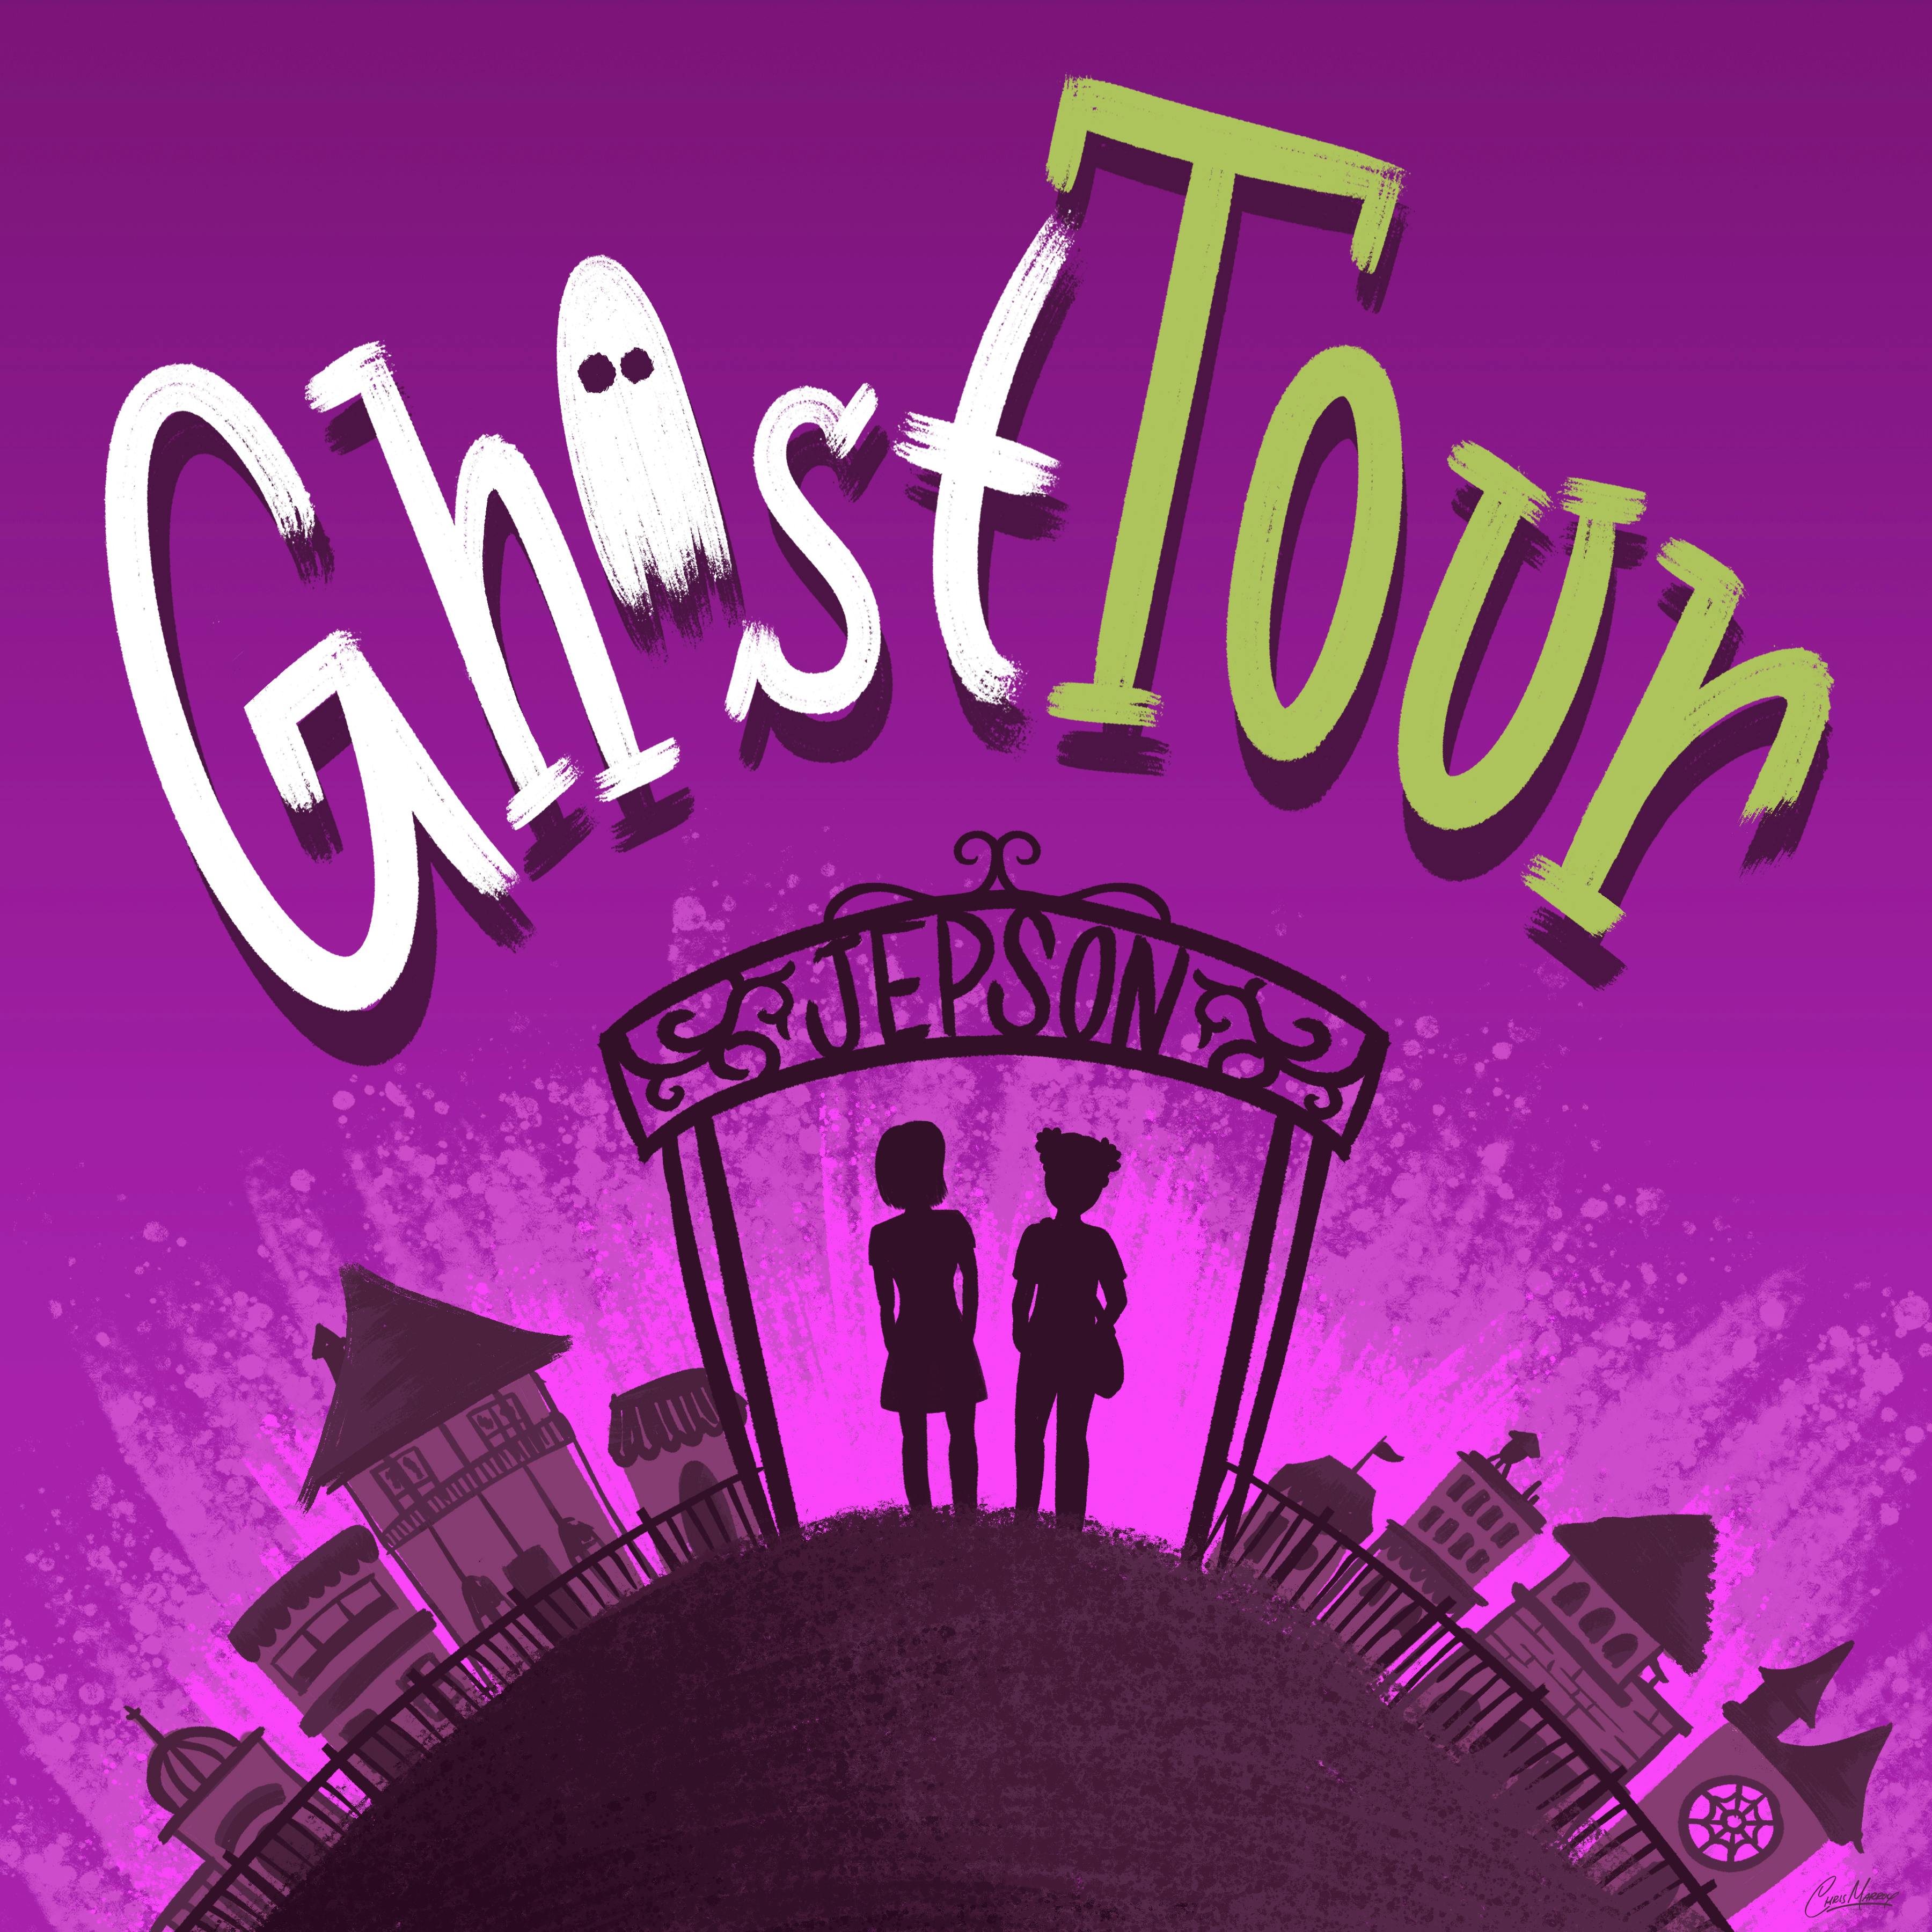 Introducing: Ghost Tour